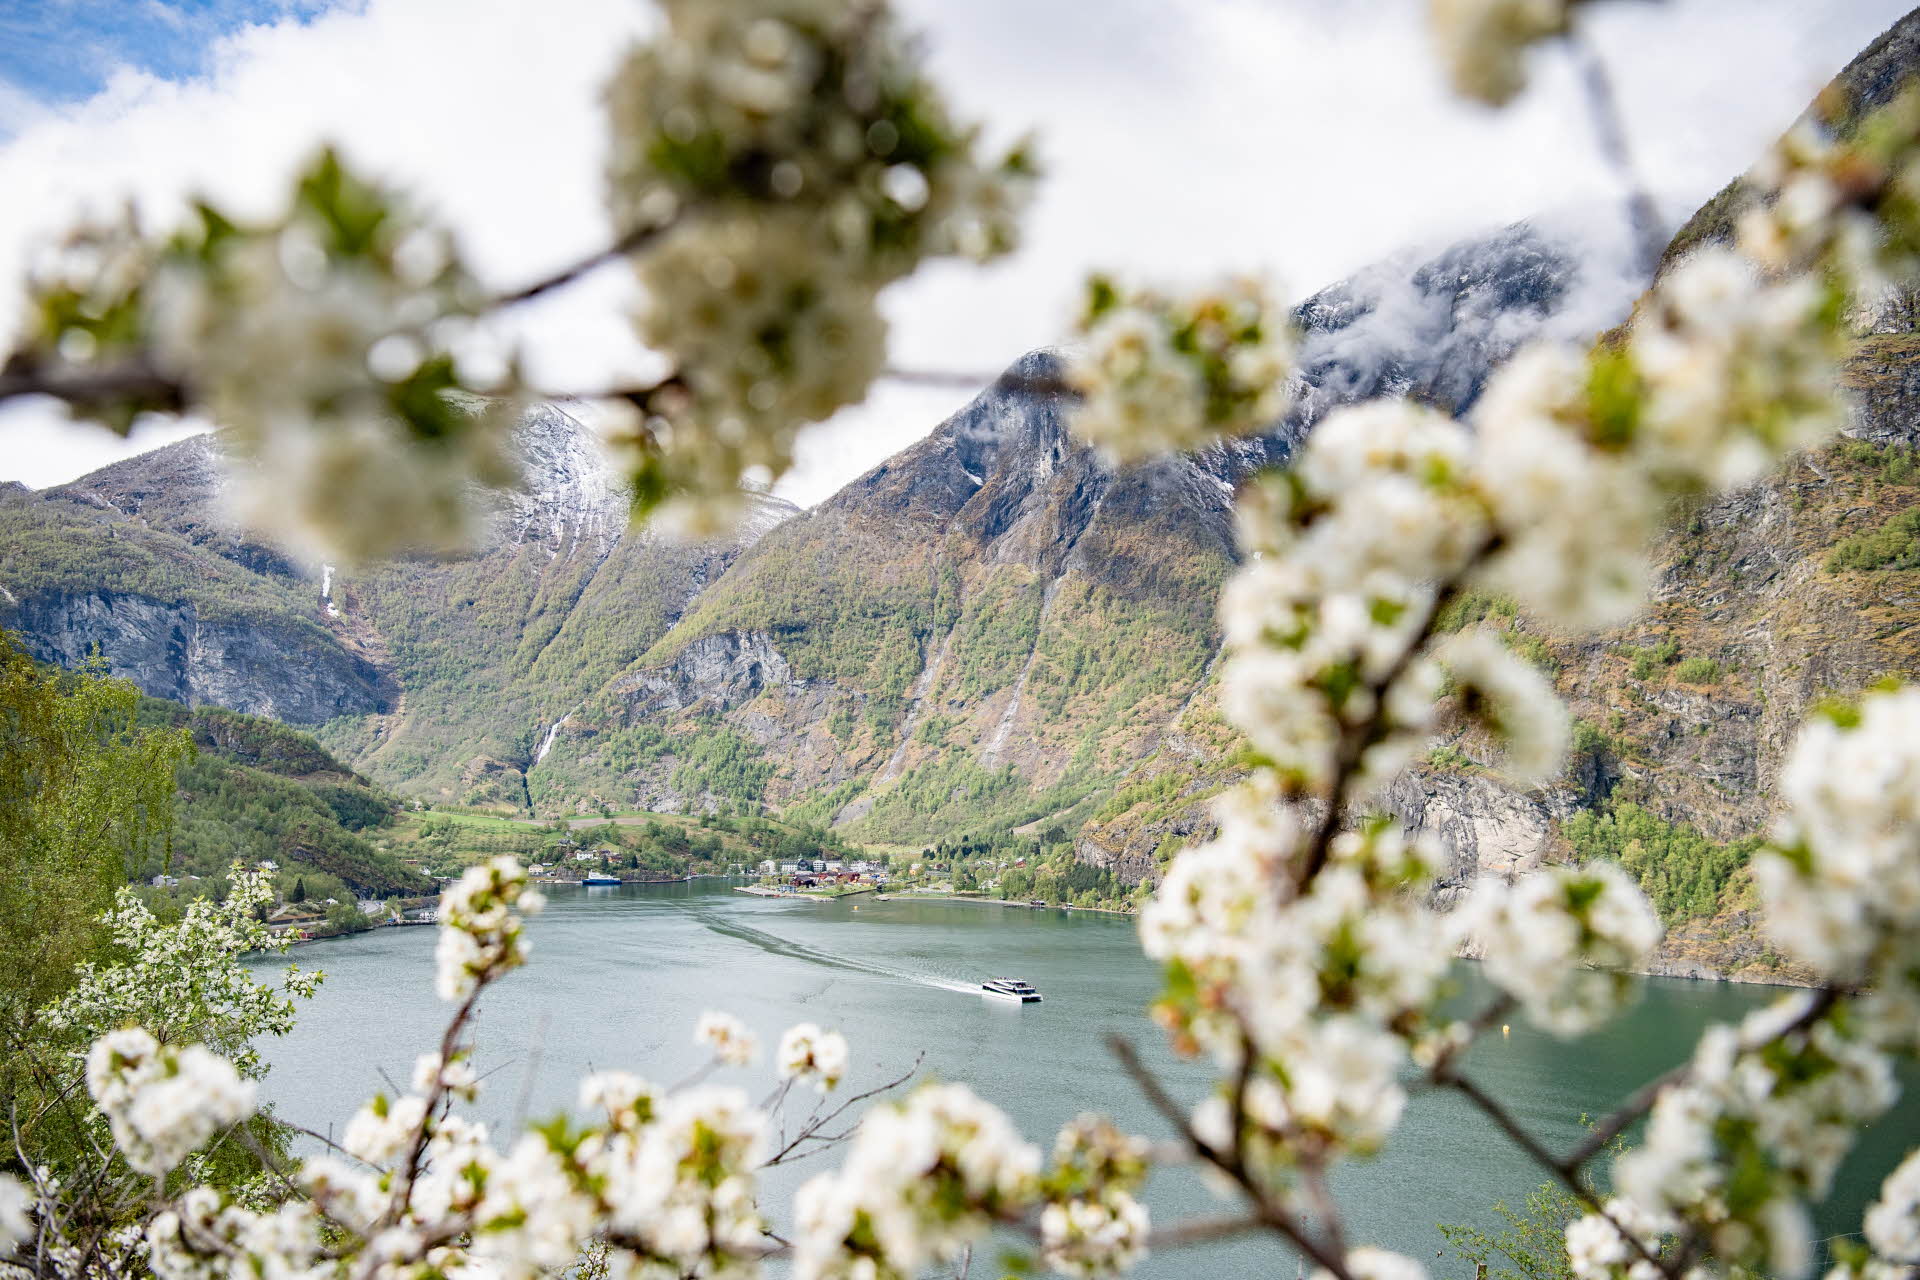 A boat sailing along the Aurlandsfjord from Flåm seen through tree branches with white flowers